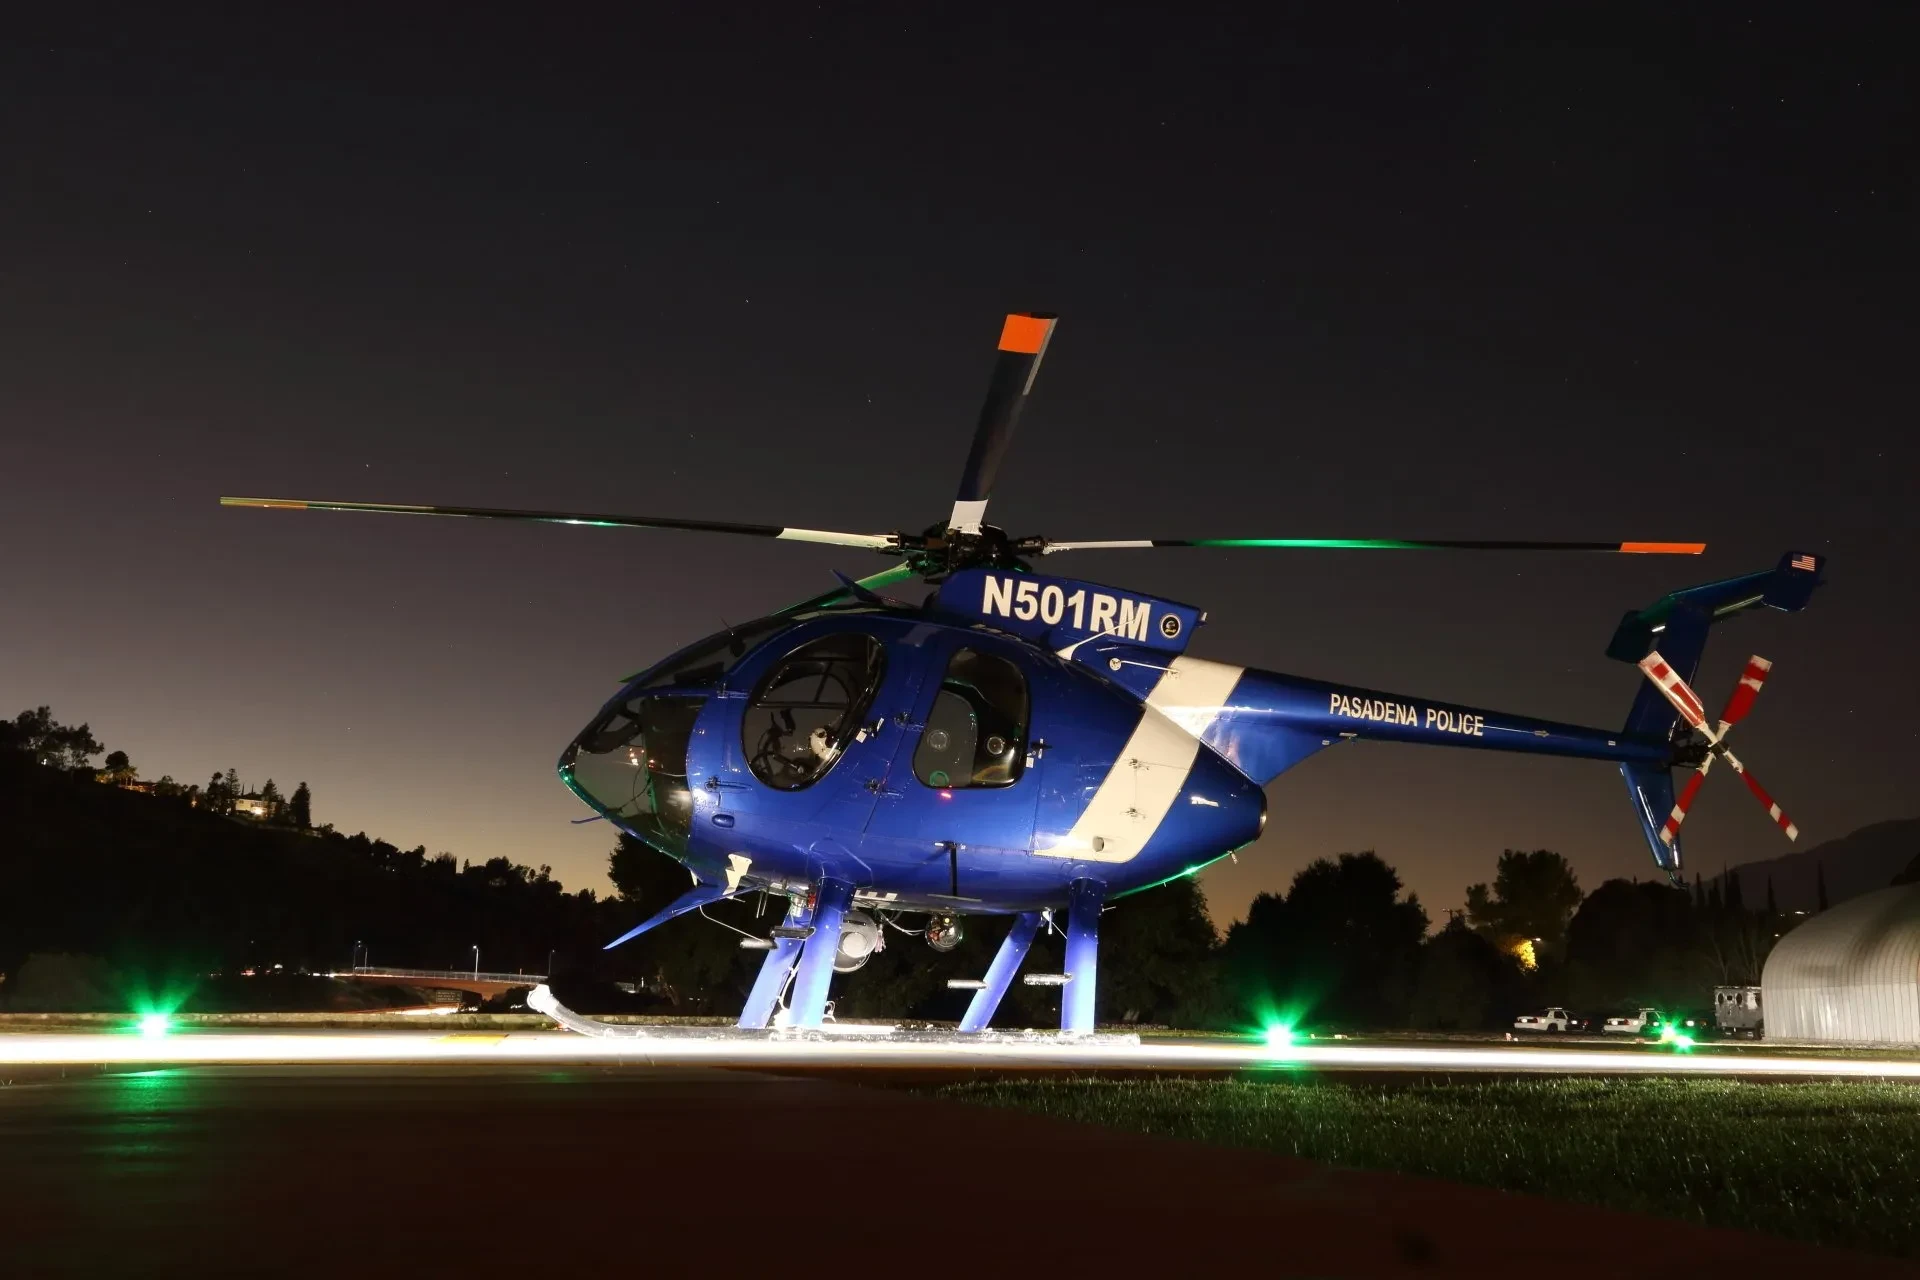 HeliOps Magazine - Great to see the new Isolair Bell 505 spray